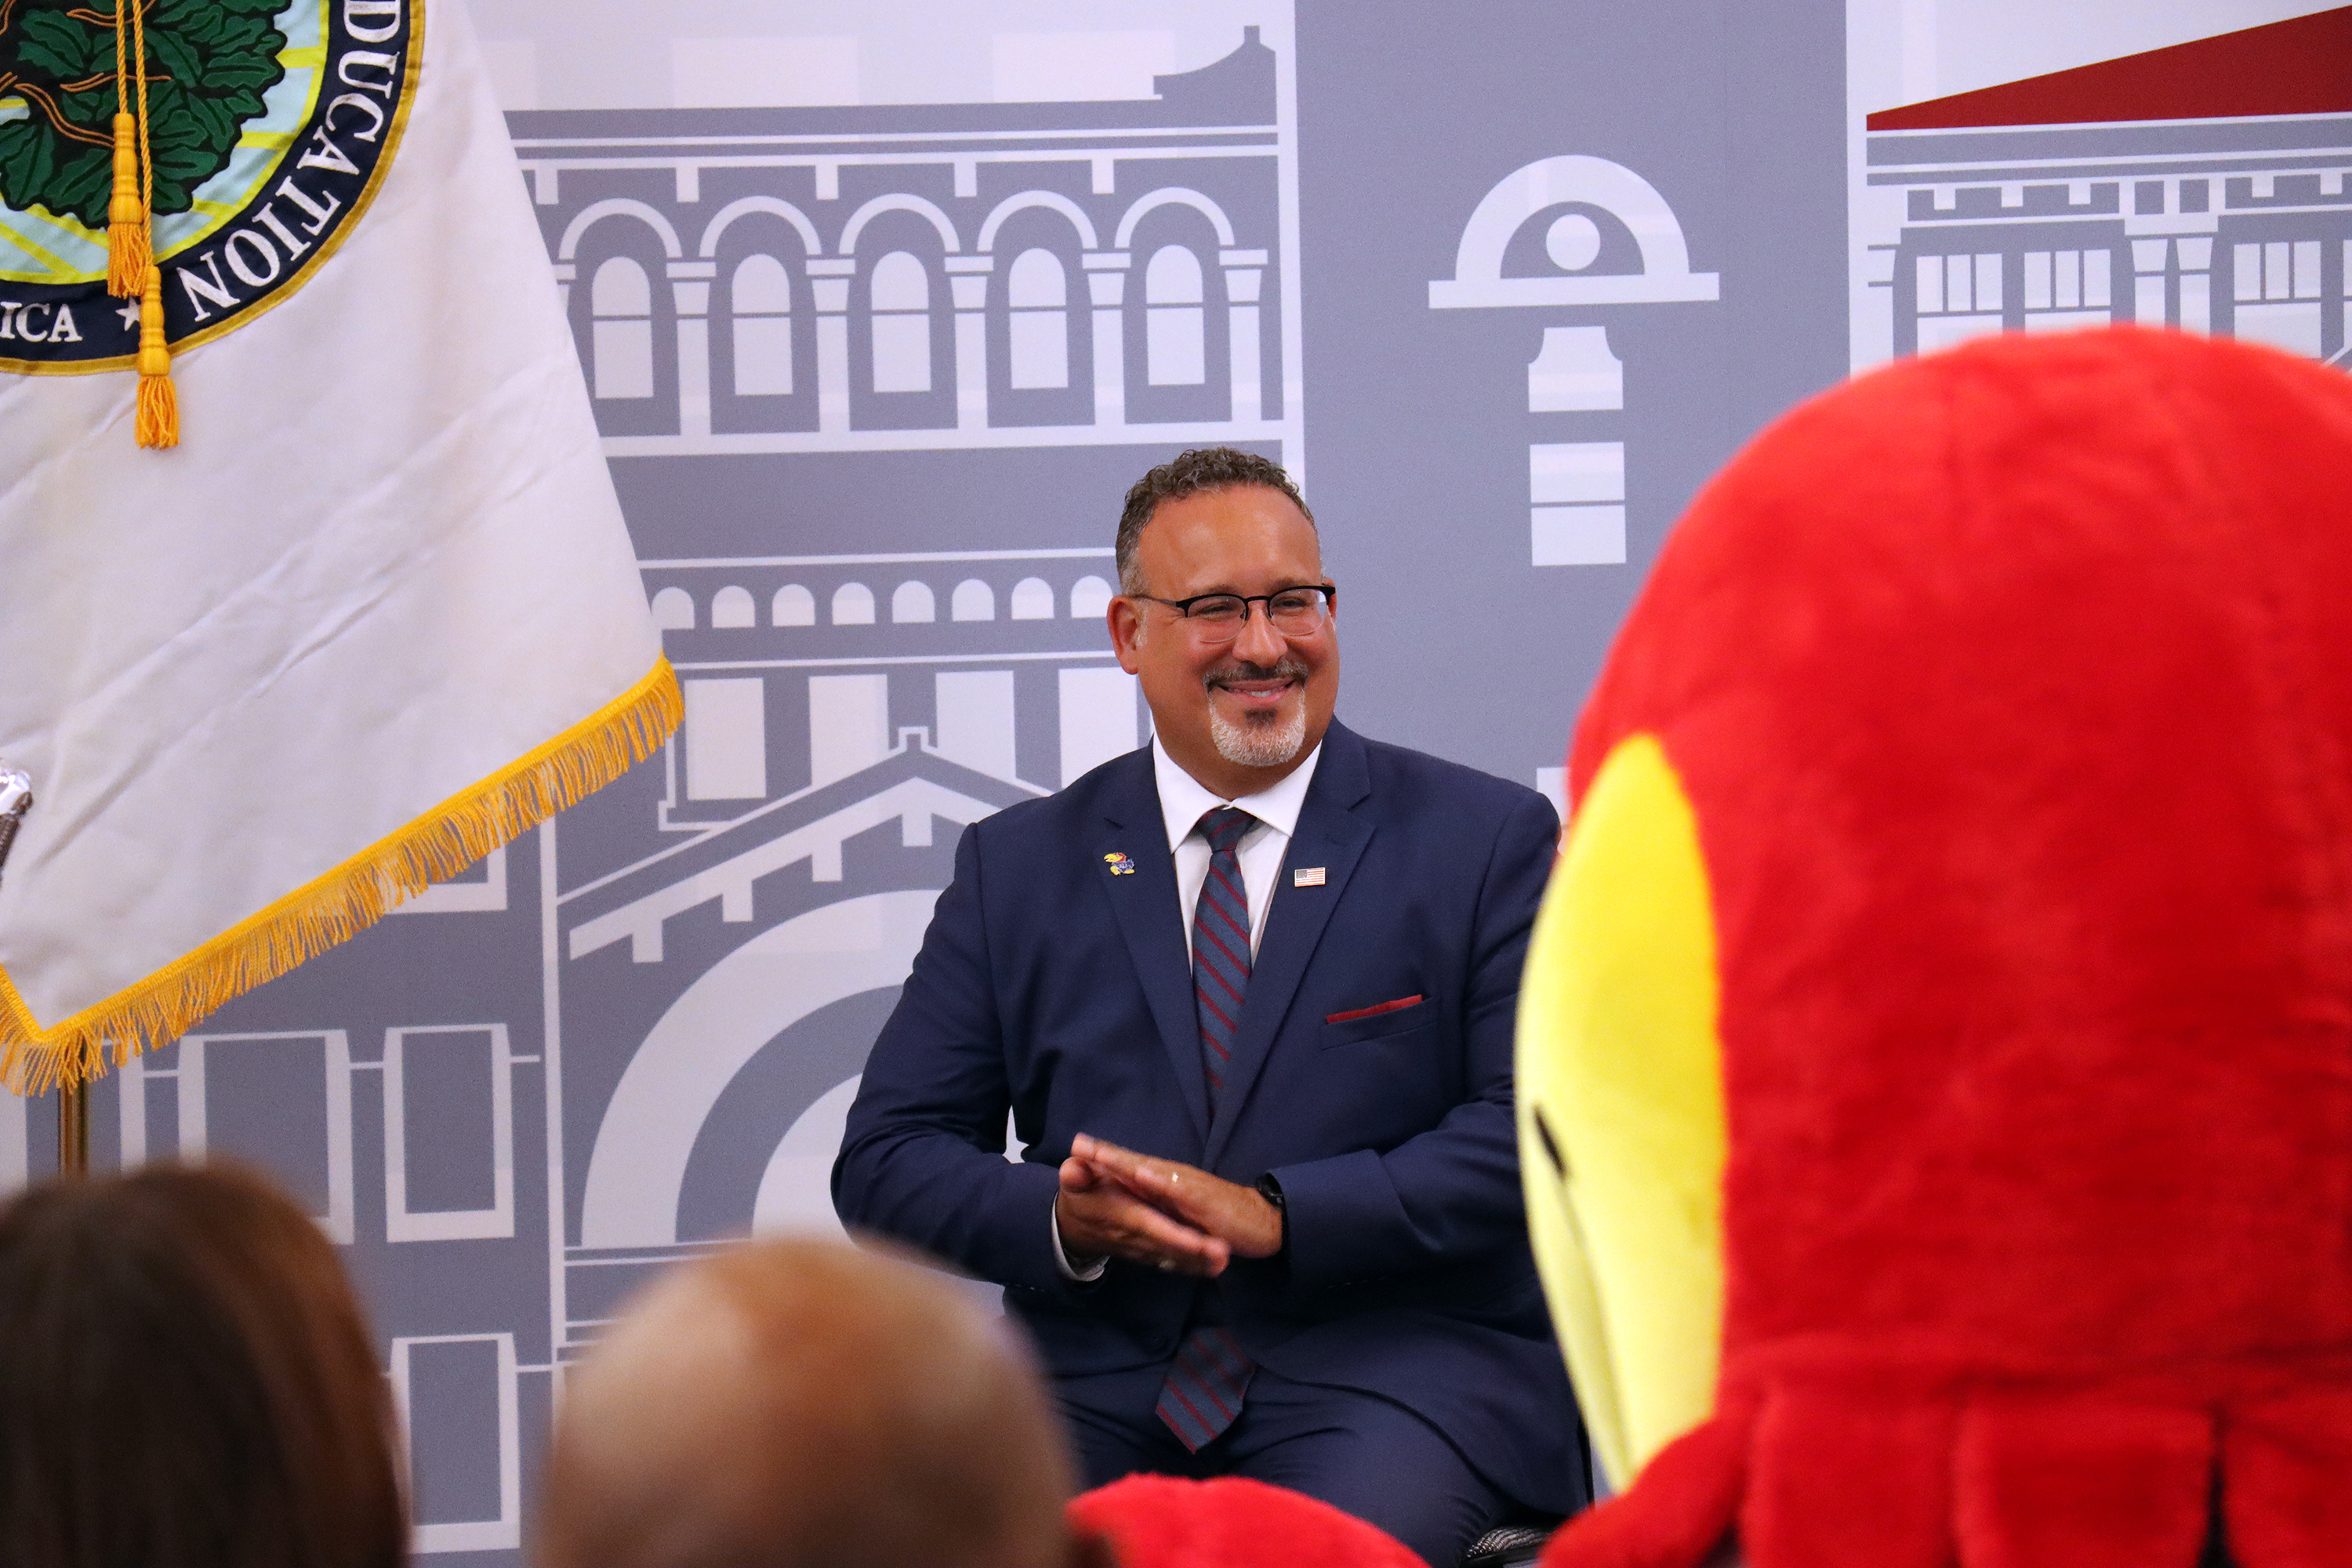  U.S. Secretary of Education Miguel Cardona sits, foregrounded by the heads of attendees and KU mascot Big Jay. 